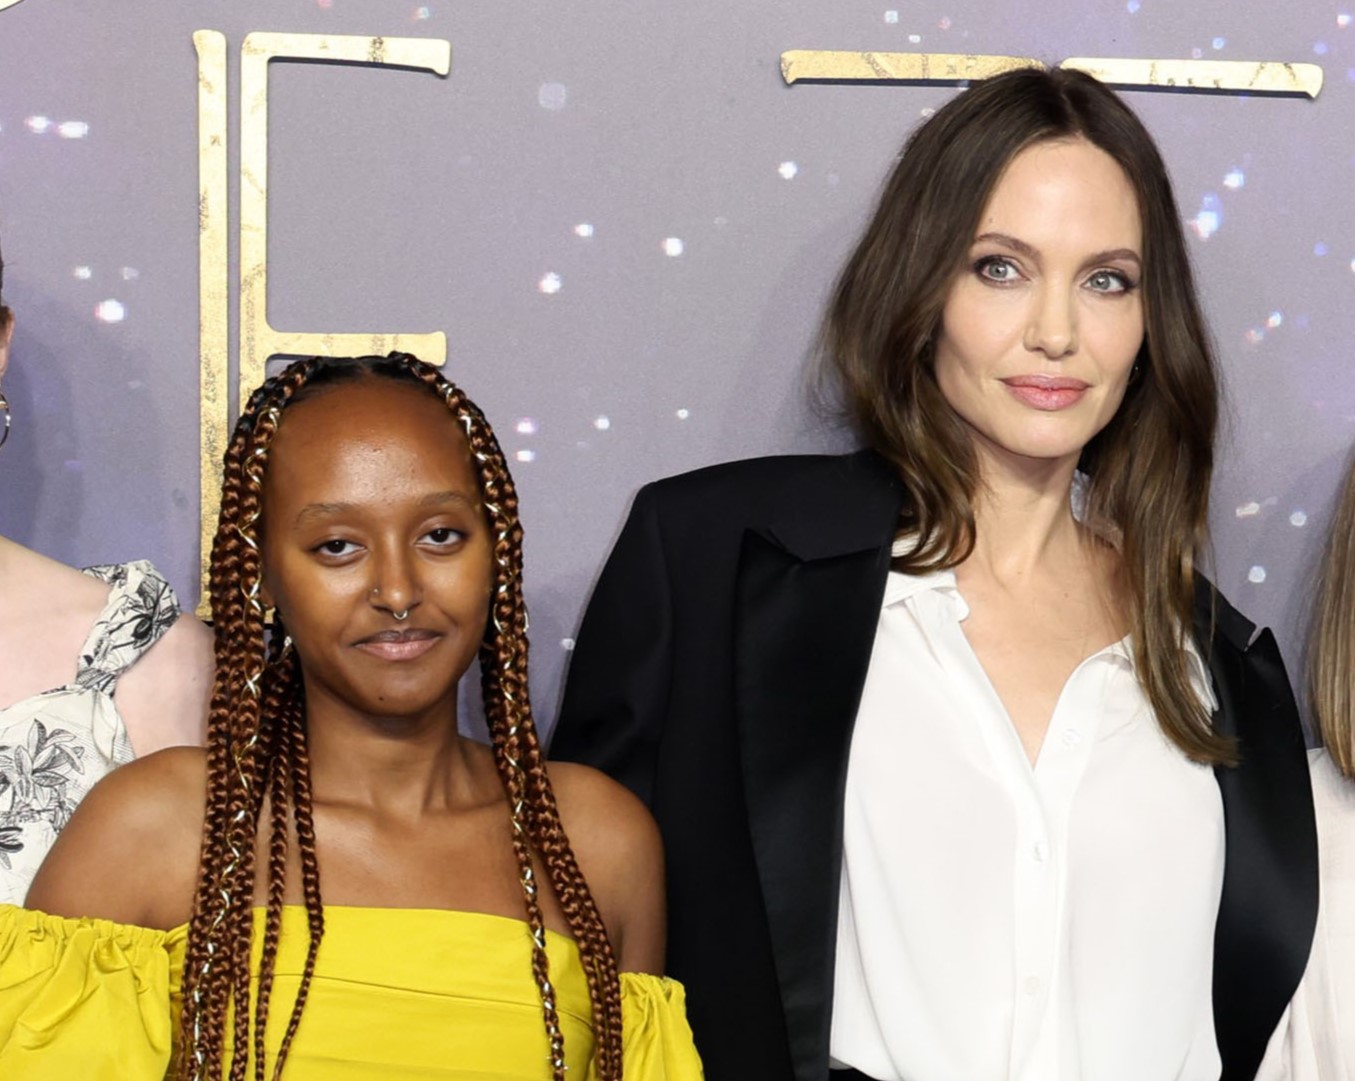 Angelina Jolie Does The Electric Slide At Fundraiser For Spelman College Where Daughter Zahara